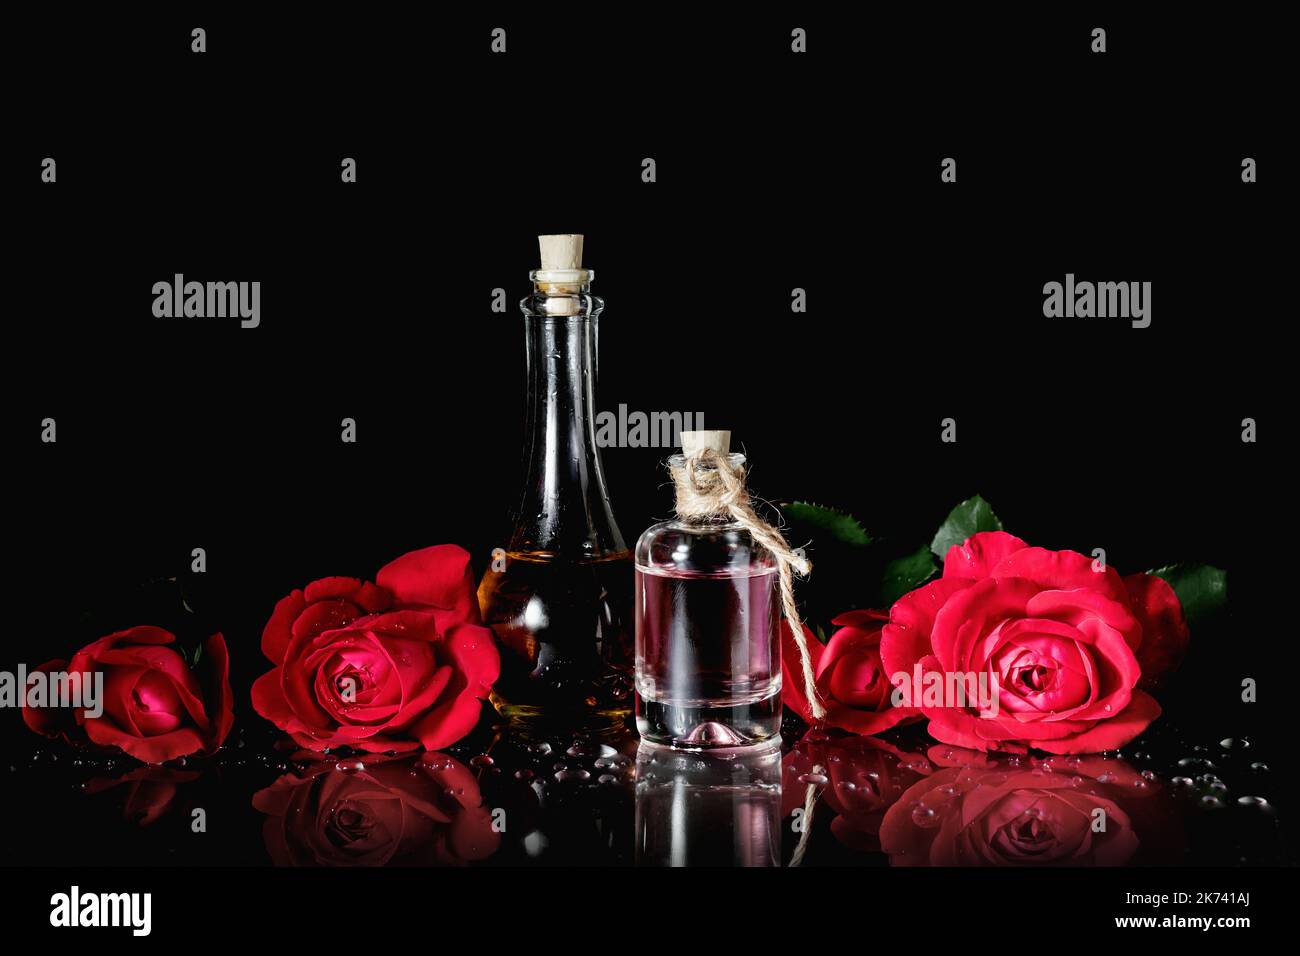 Bottles of perfume and red roses on a black background. Stock Photo